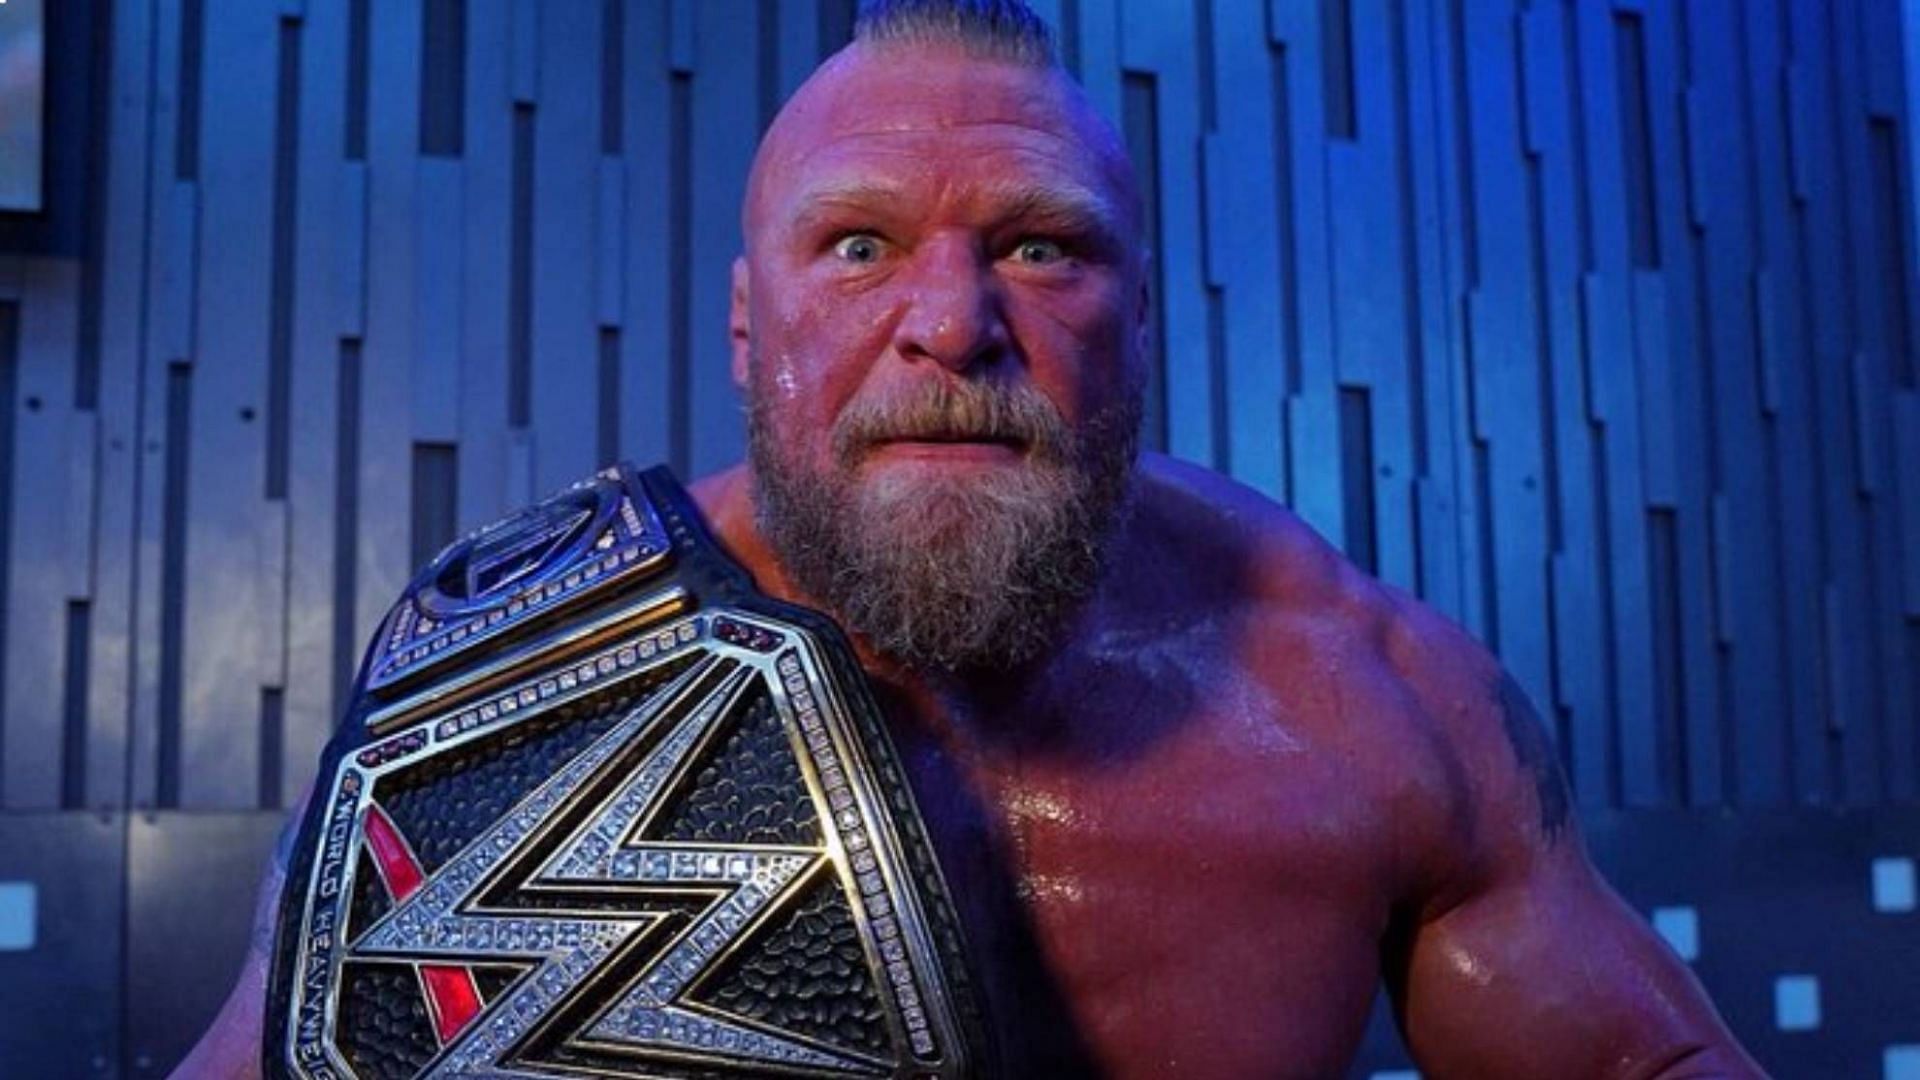 The Beast set the bar for what it meant to be a part-time Champion in WWE